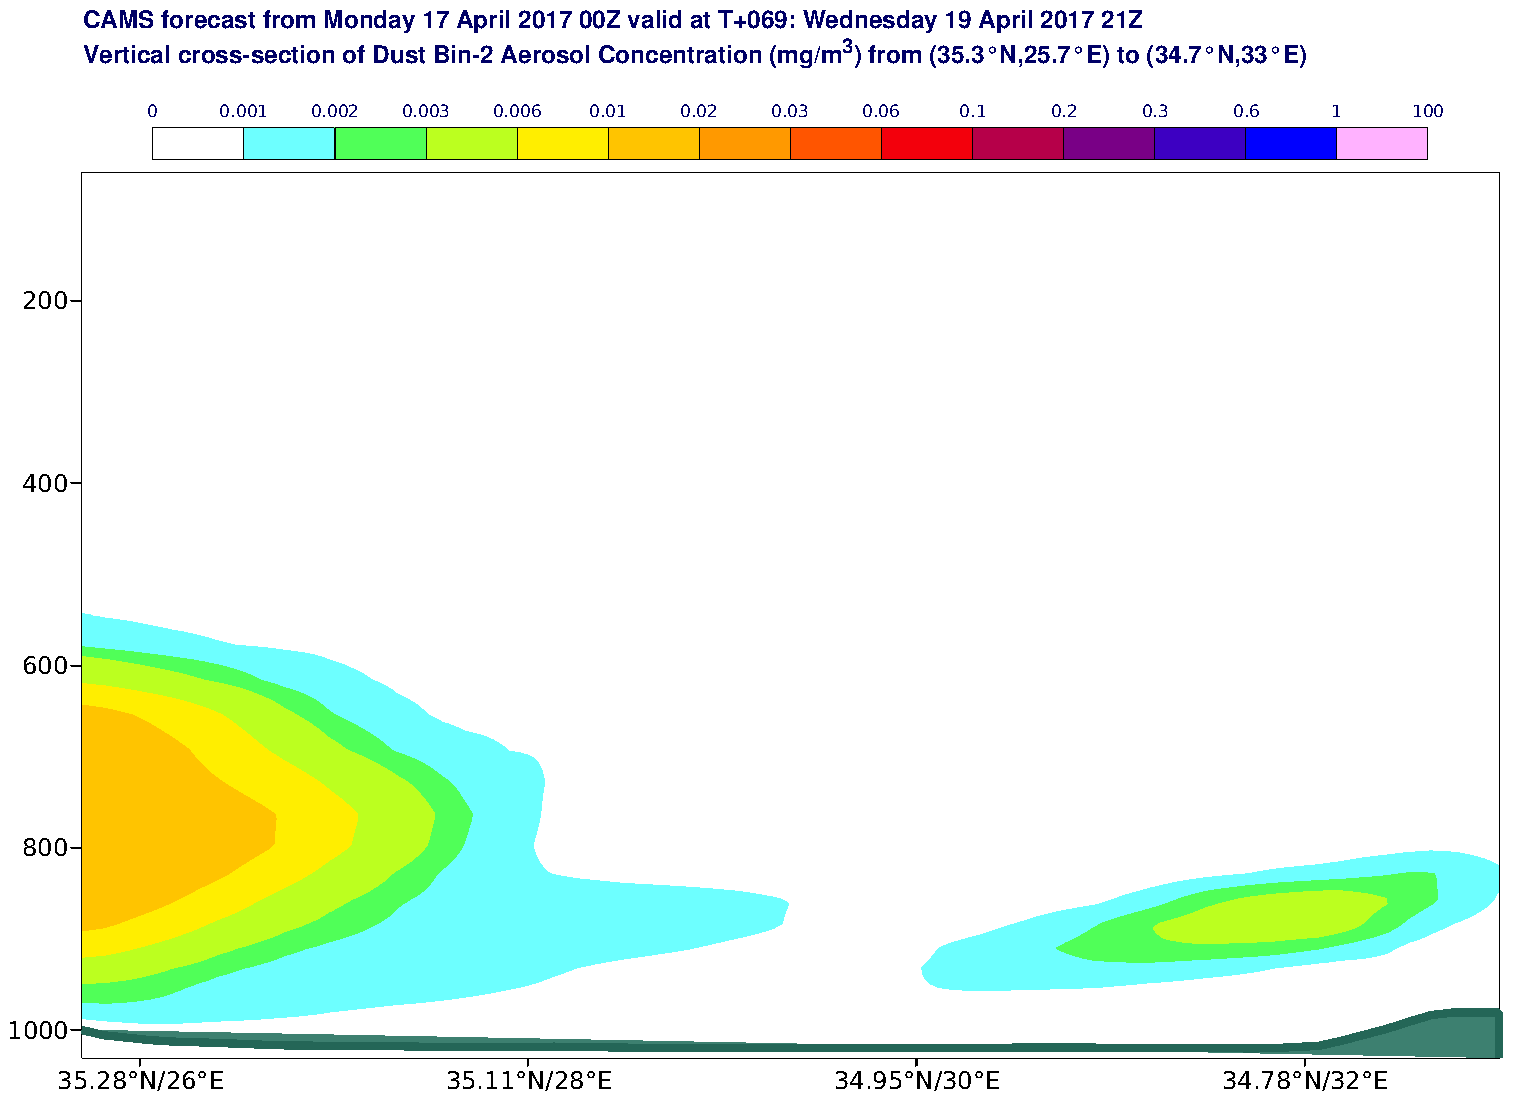 Vertical cross-section of Dust Bin-2 Aerosol Concentration (mg/m3) valid at T69 - 2017-04-19 21:00